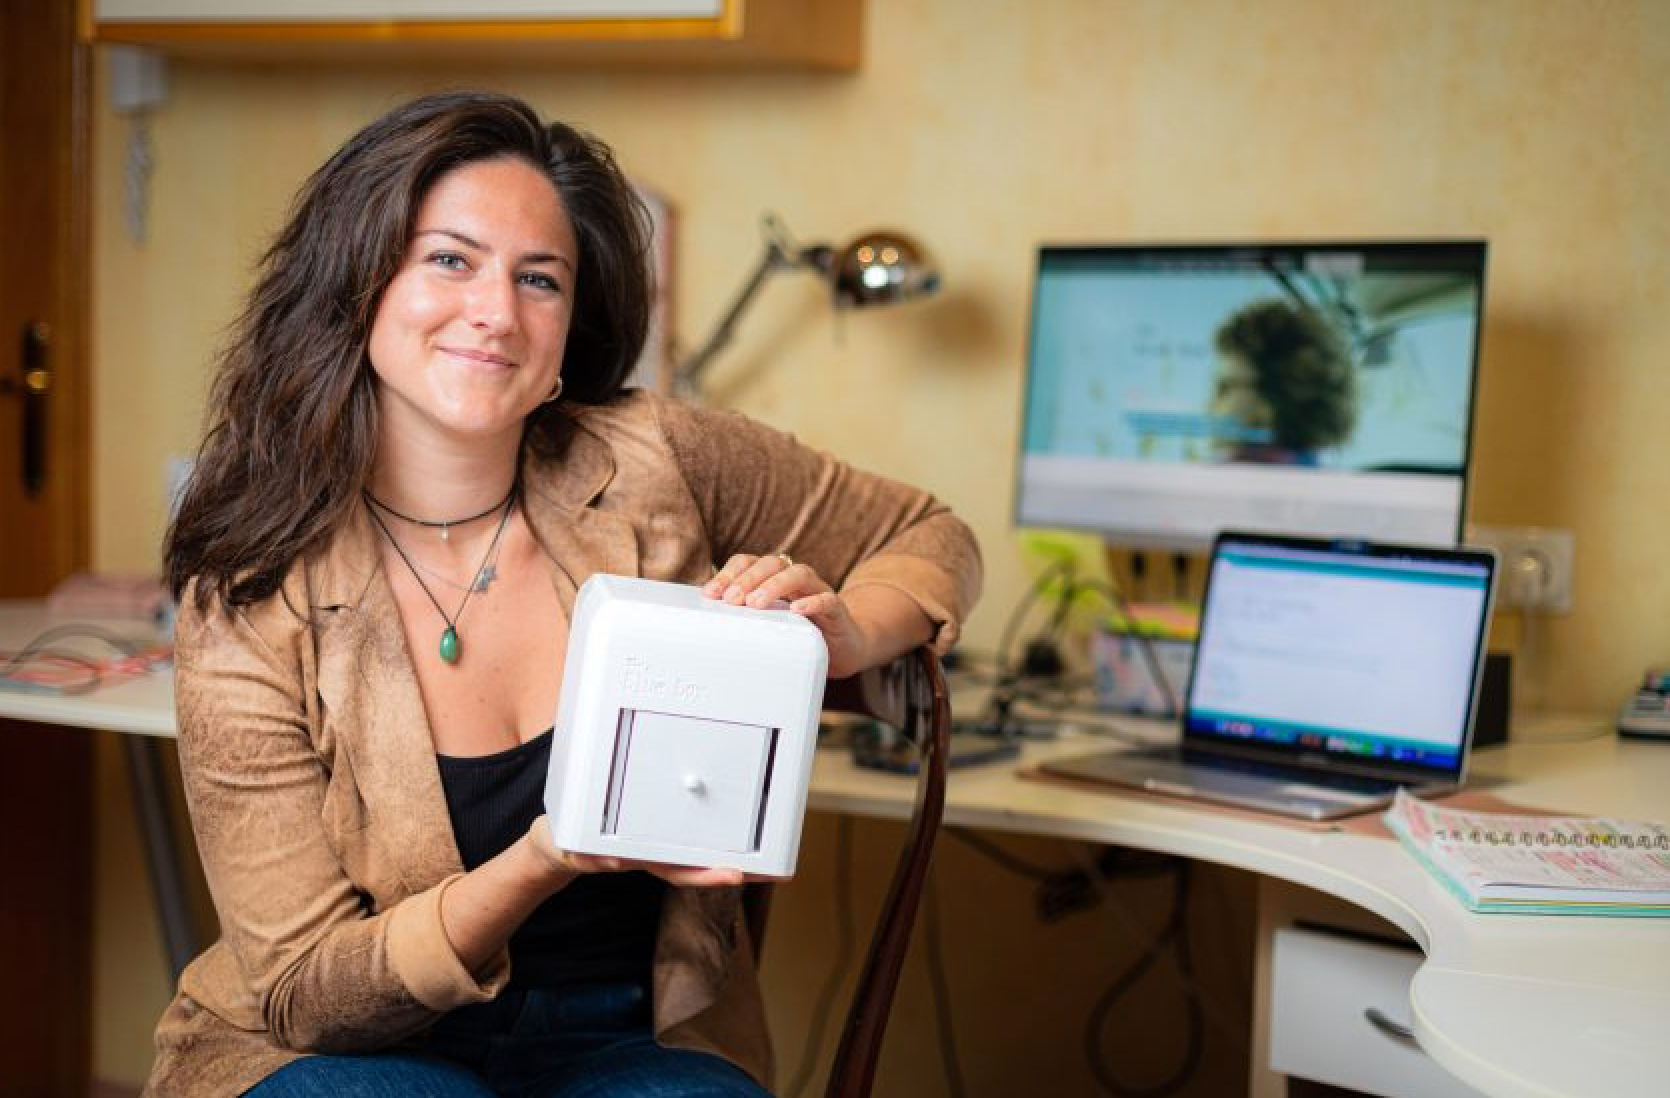 Judit Giró Benet and Her Breast-Cancer Detecting Blue Box